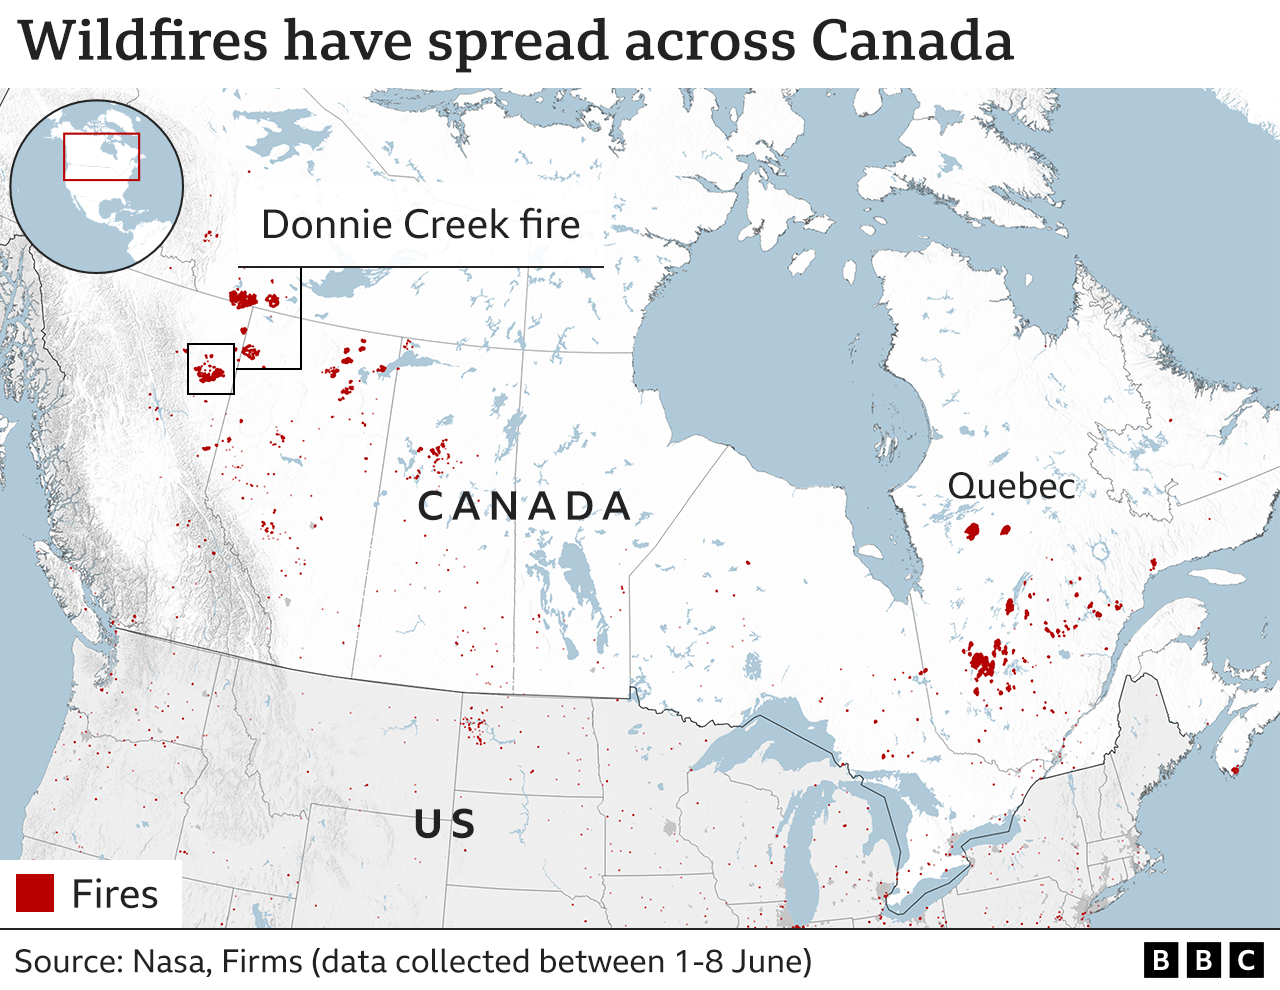 Map showing location of fires across Canada with the biggest fire in British Columbia and another big cluster in Quebec